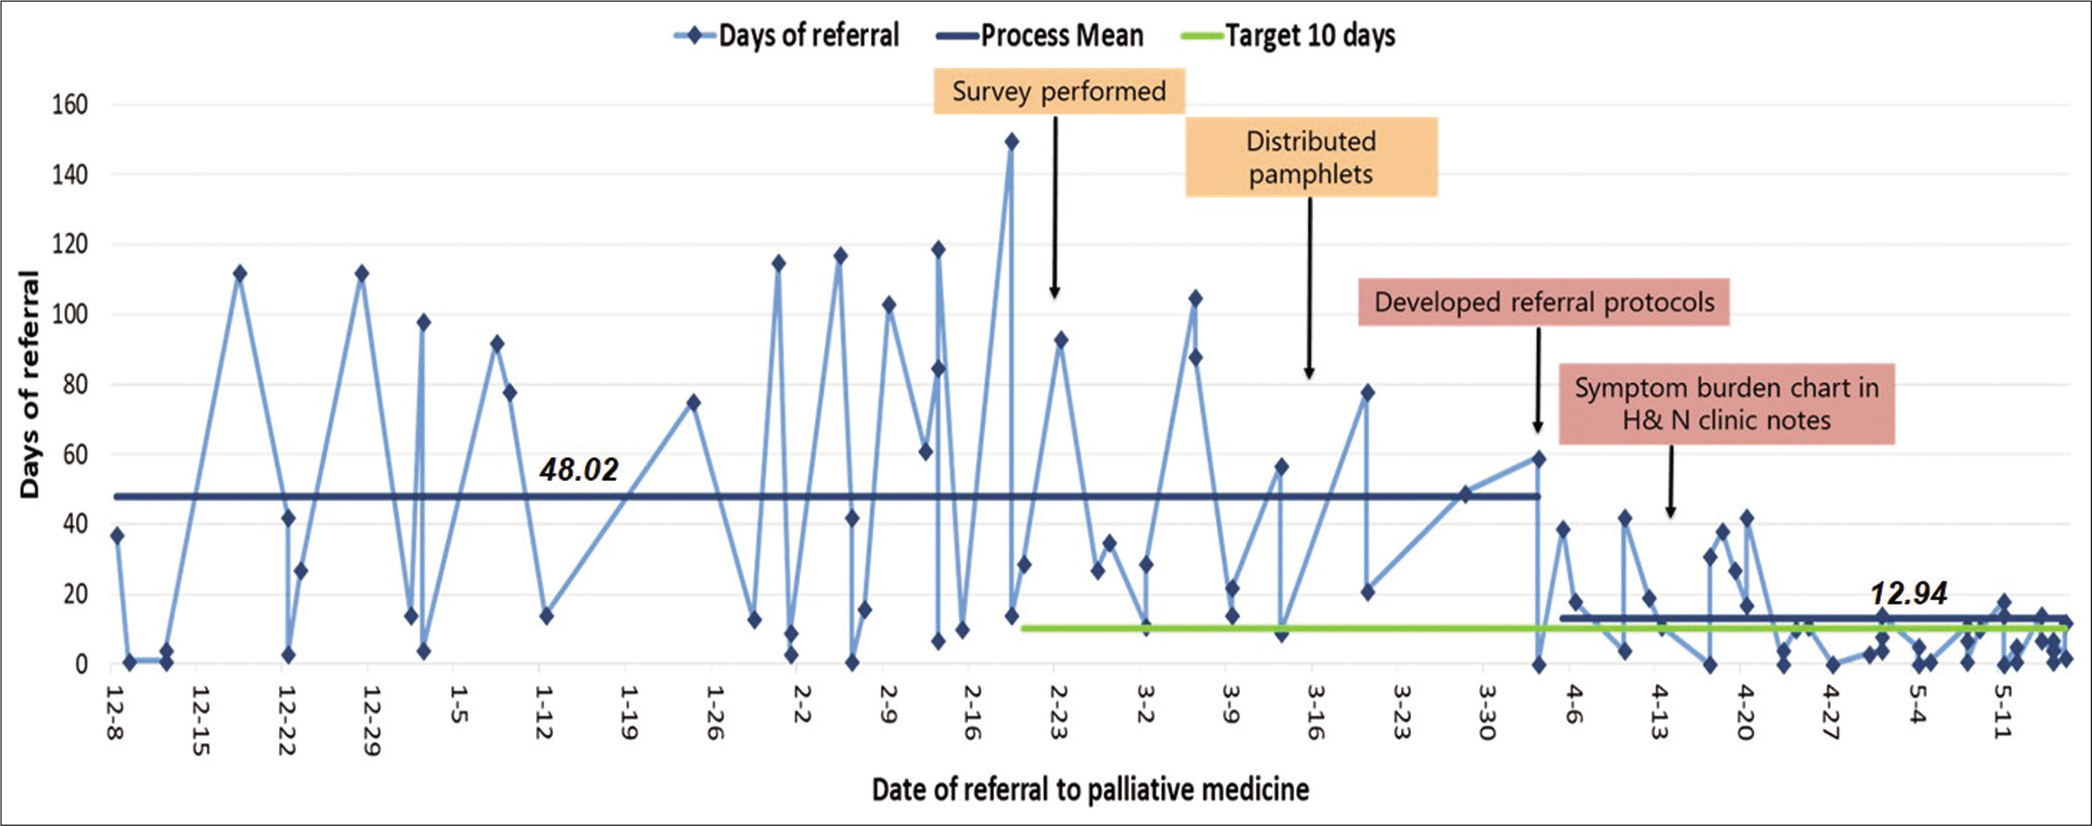 Days of referral for advanced oral cancer patients to palliative medicine clinic